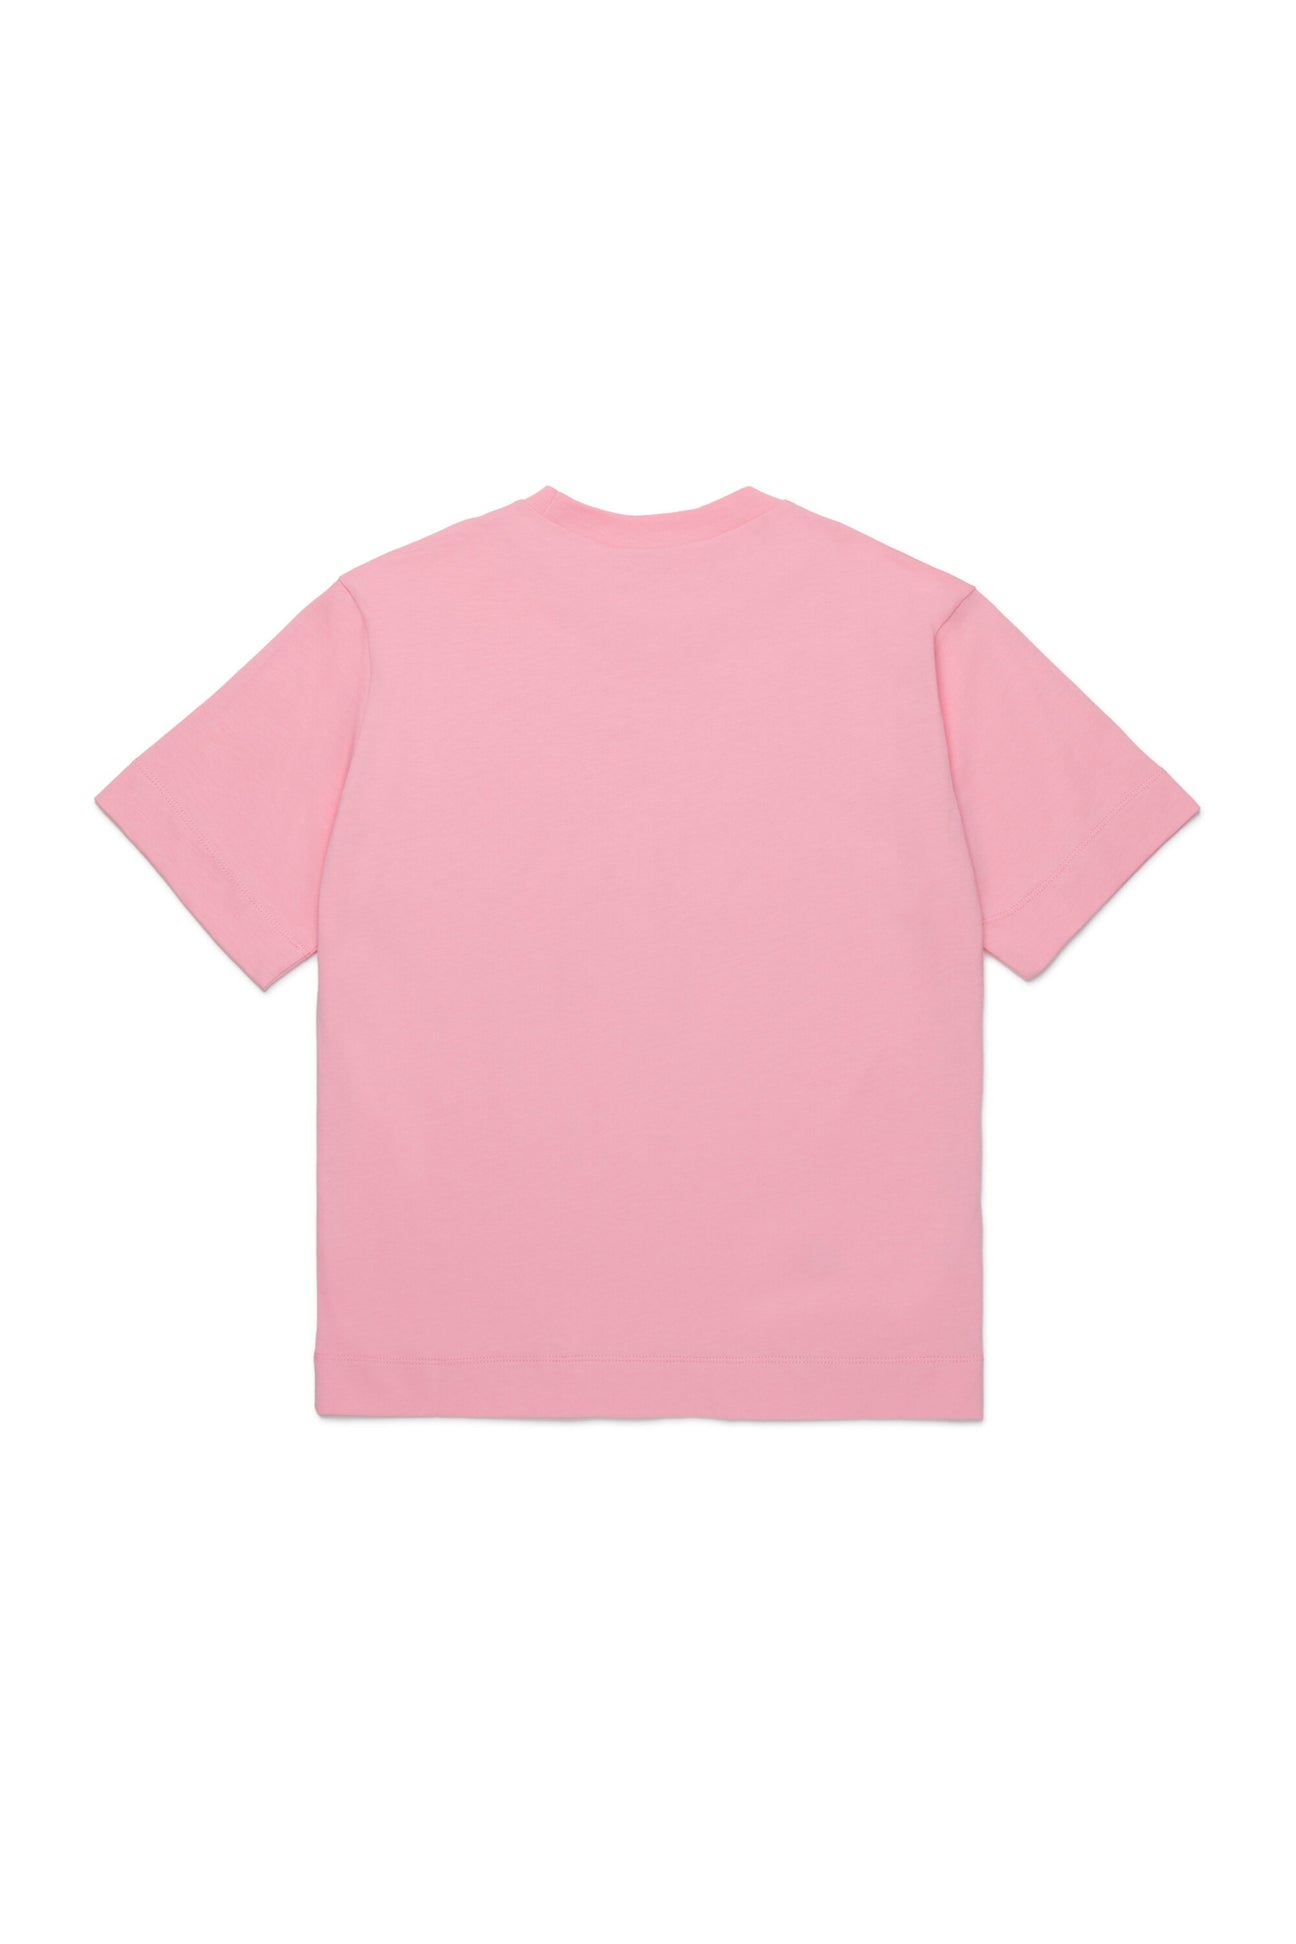 Marni kid crew-neck T-shirt in jersey with logo | BRAVE KID